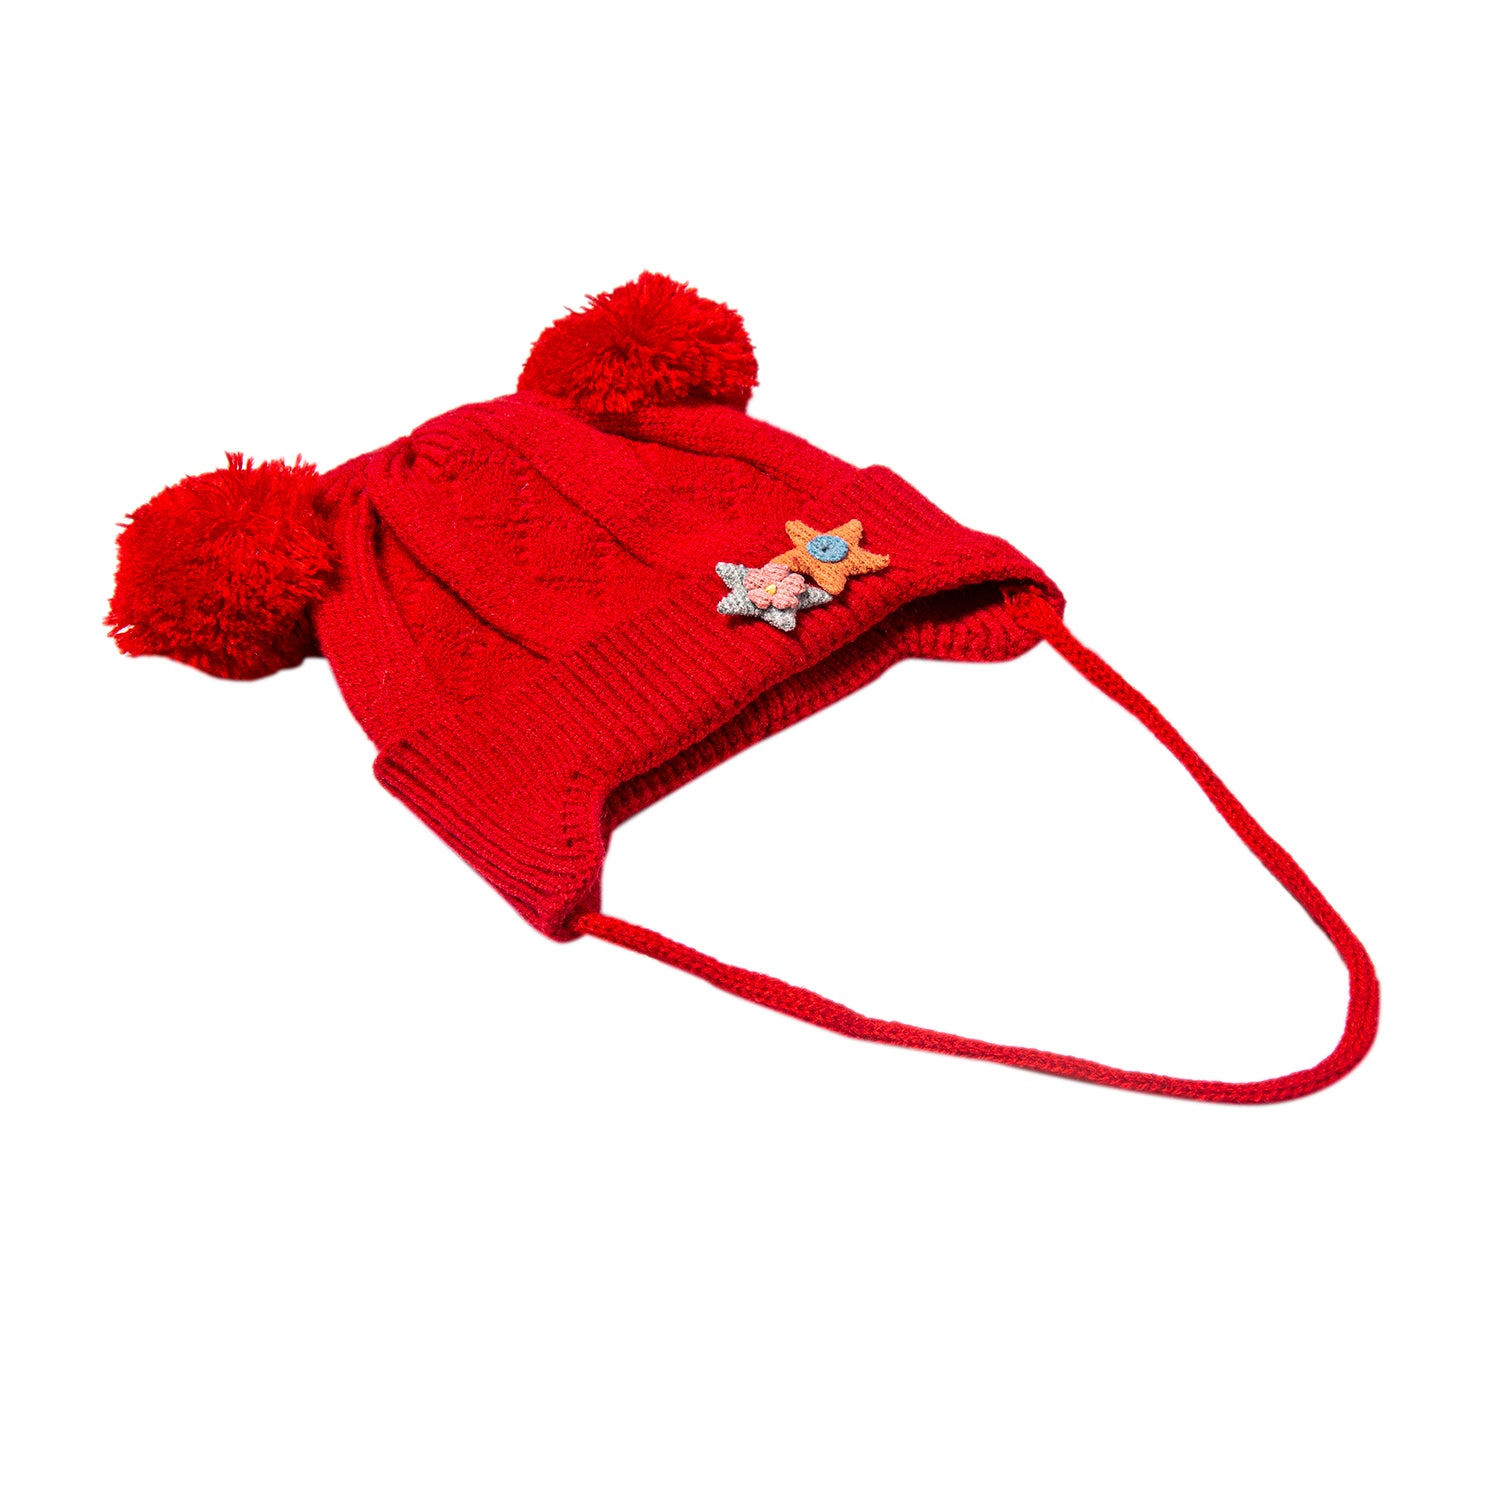 Baby Moo Knit Woollen Cap With Tie For Ear Cover Starry Pom Pom Red